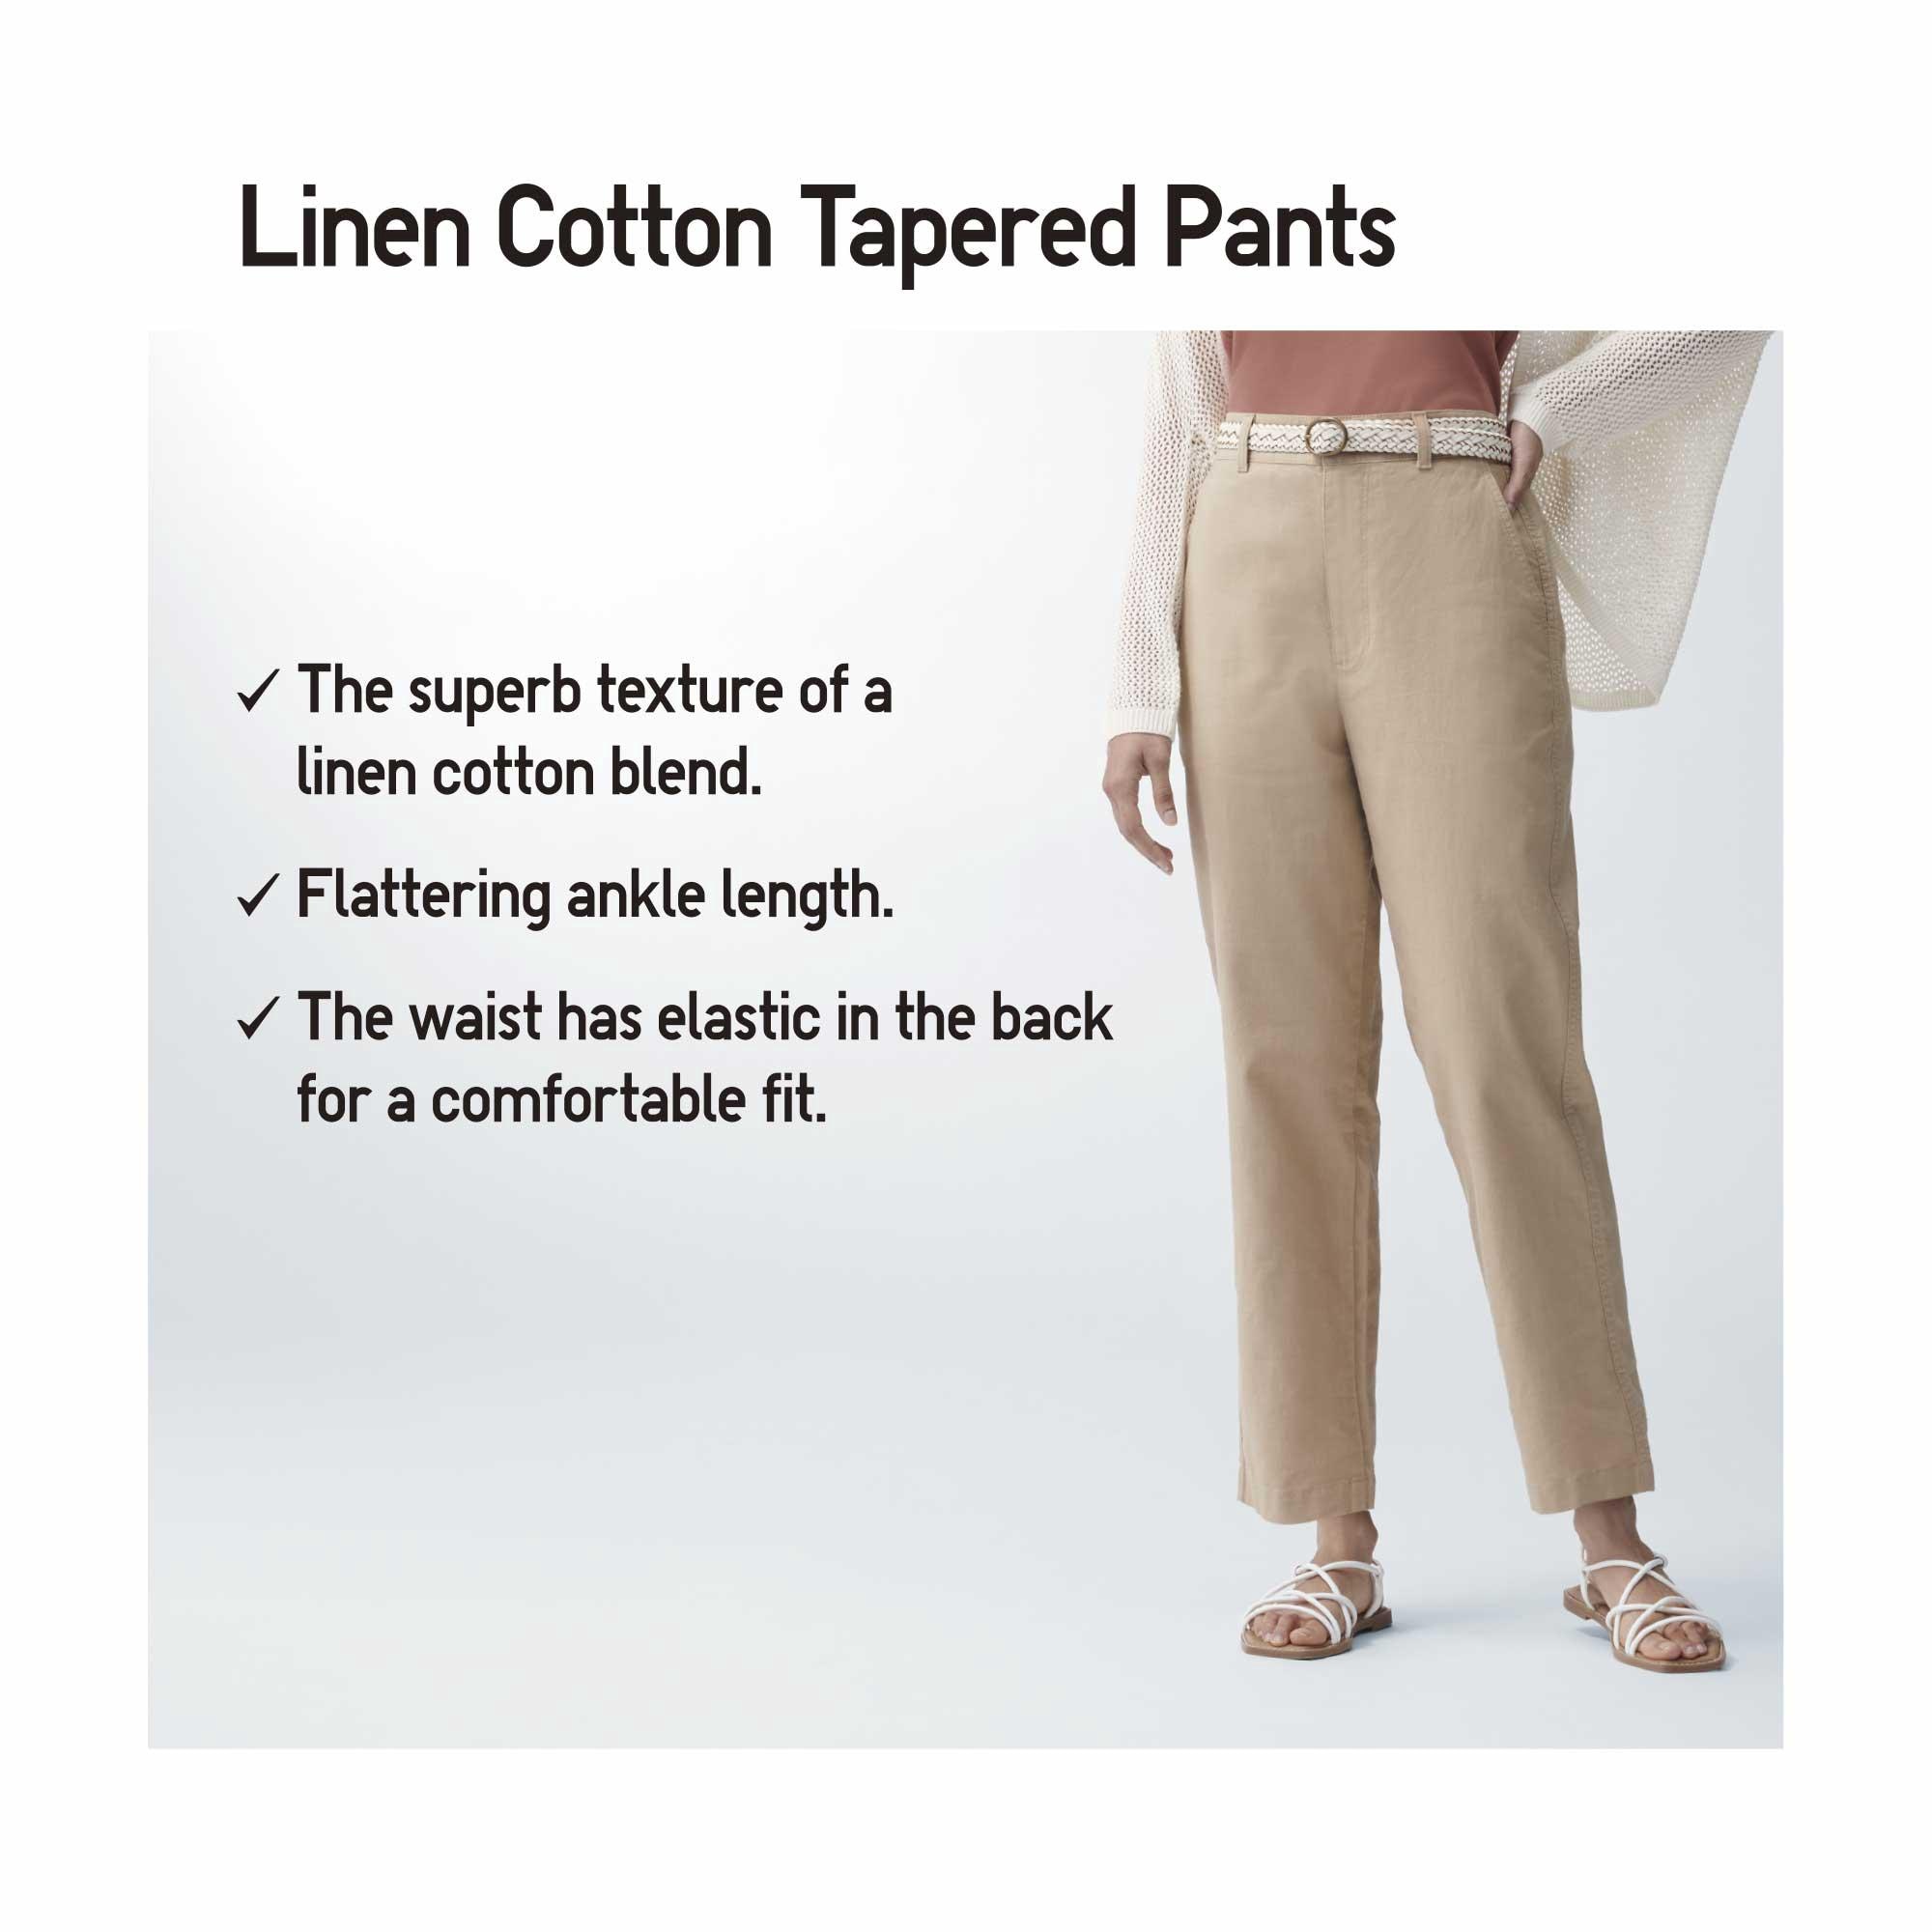 LINEN COTTON TAPERED PANTS